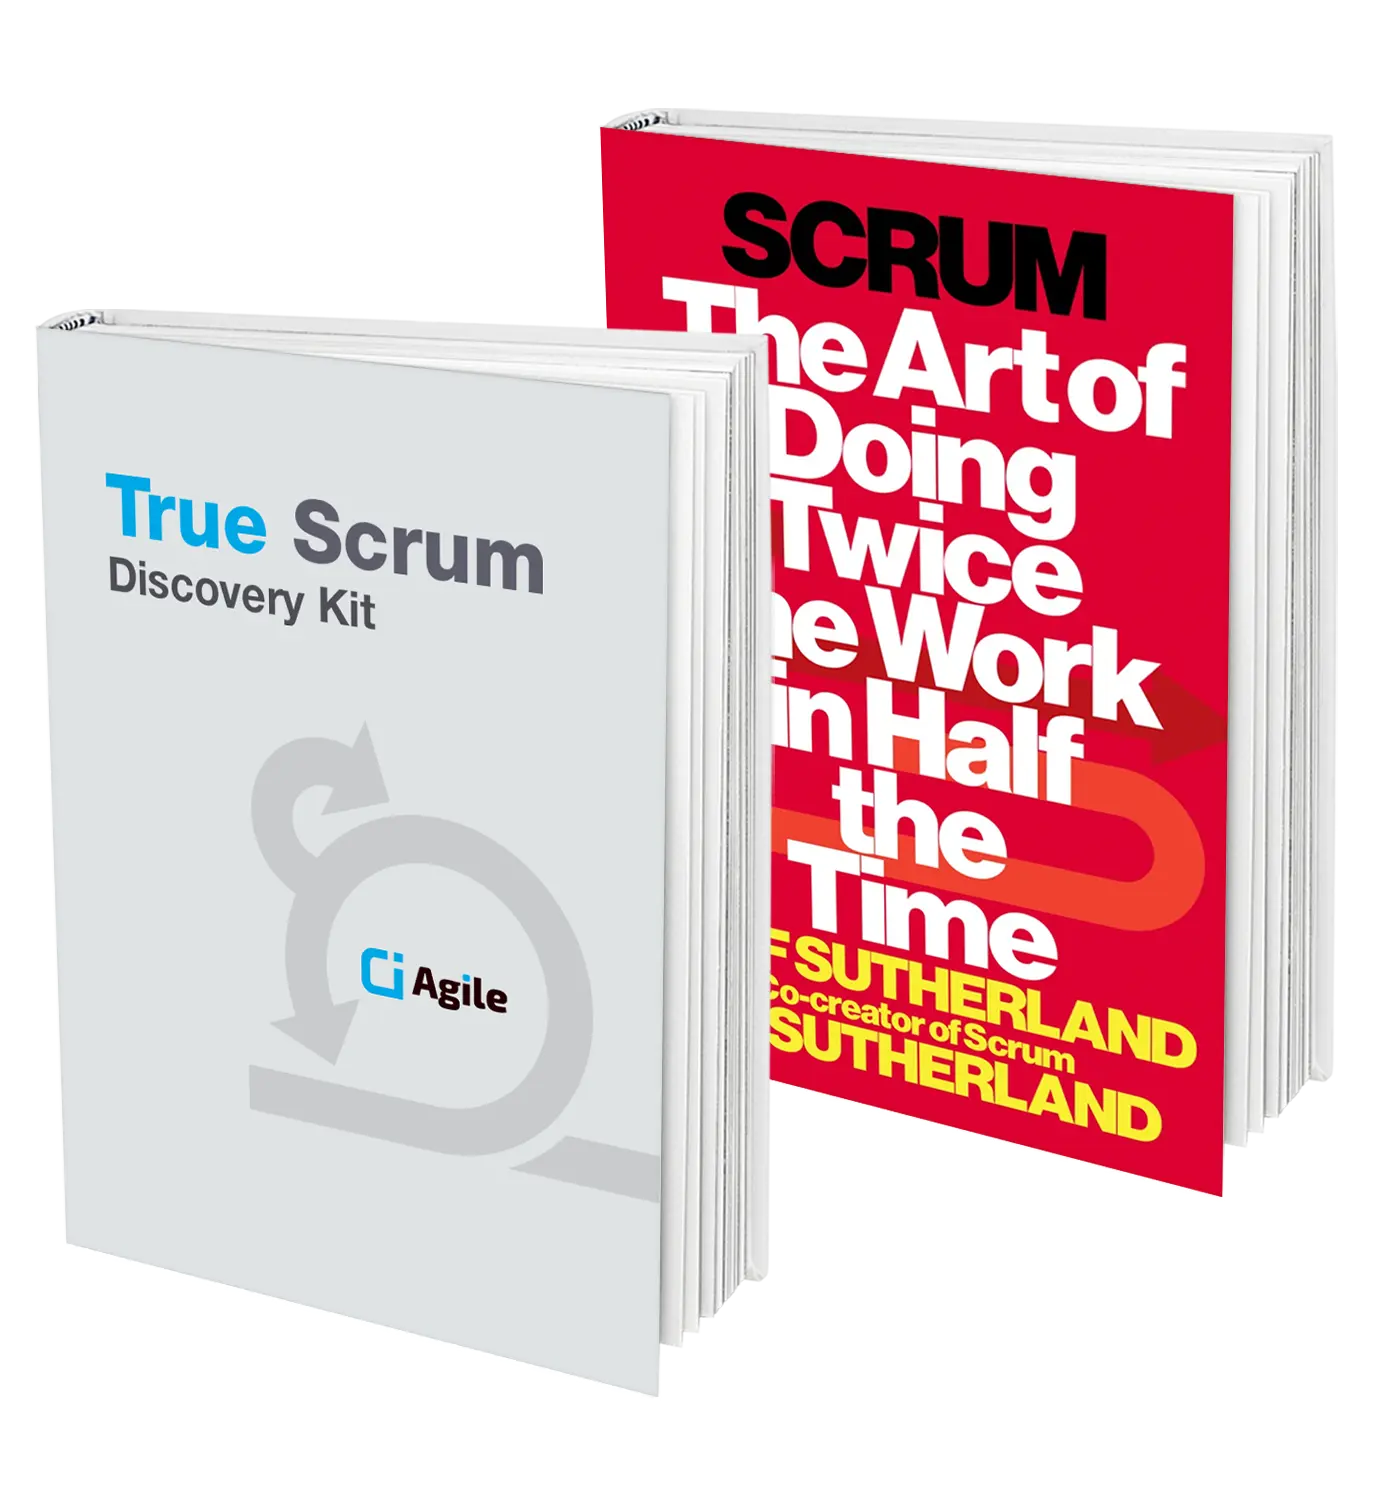 True Scrum Discovery Kit cover